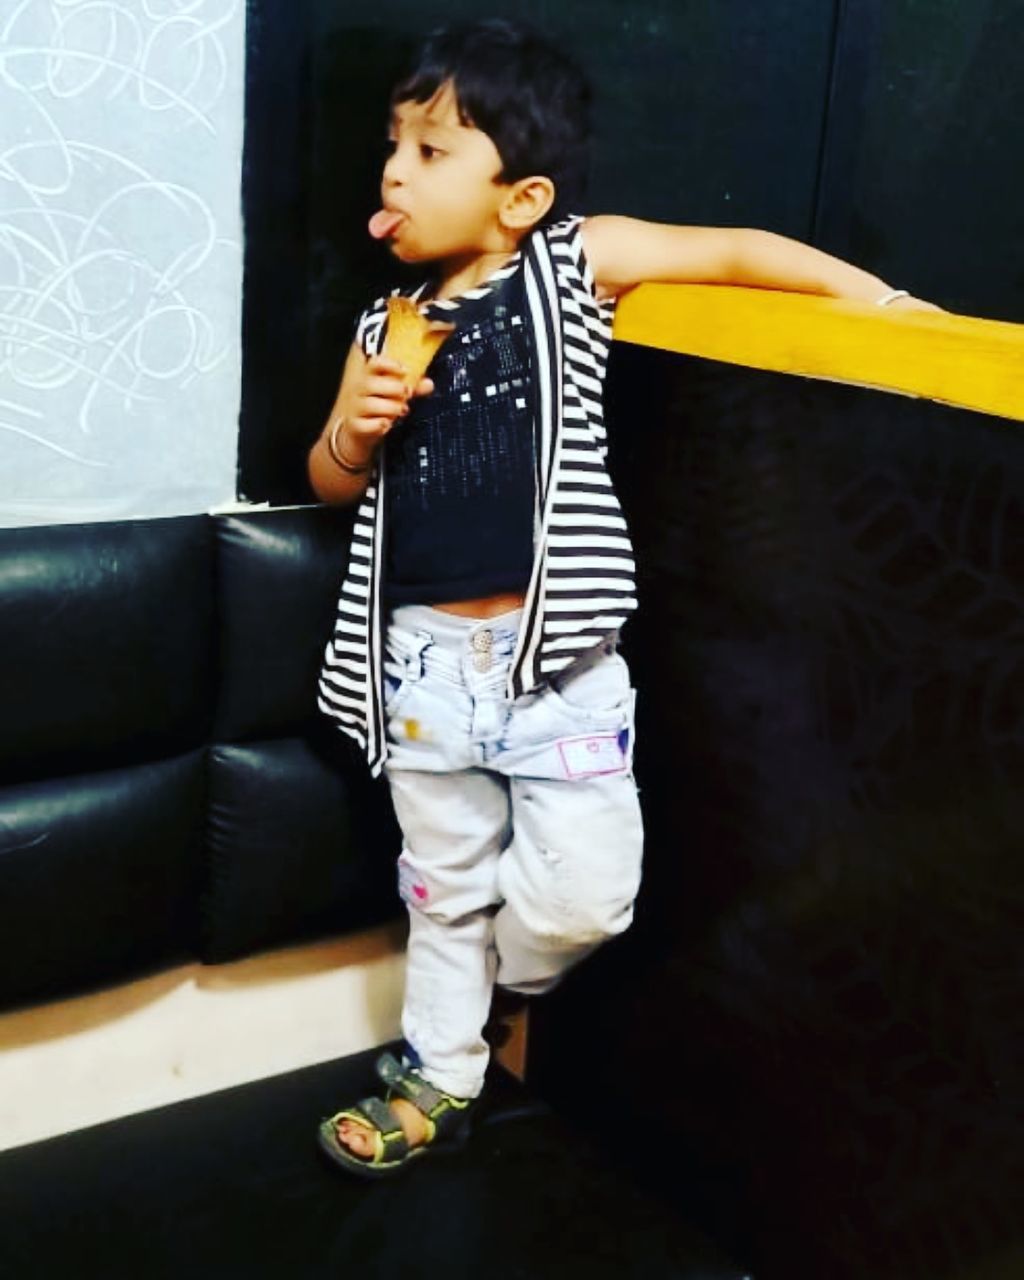 childhood, child, full length, one person, real people, casual clothing, looking, lifestyles, boys, looking away, males, front view, leisure activity, men, innocence, indoors, cute